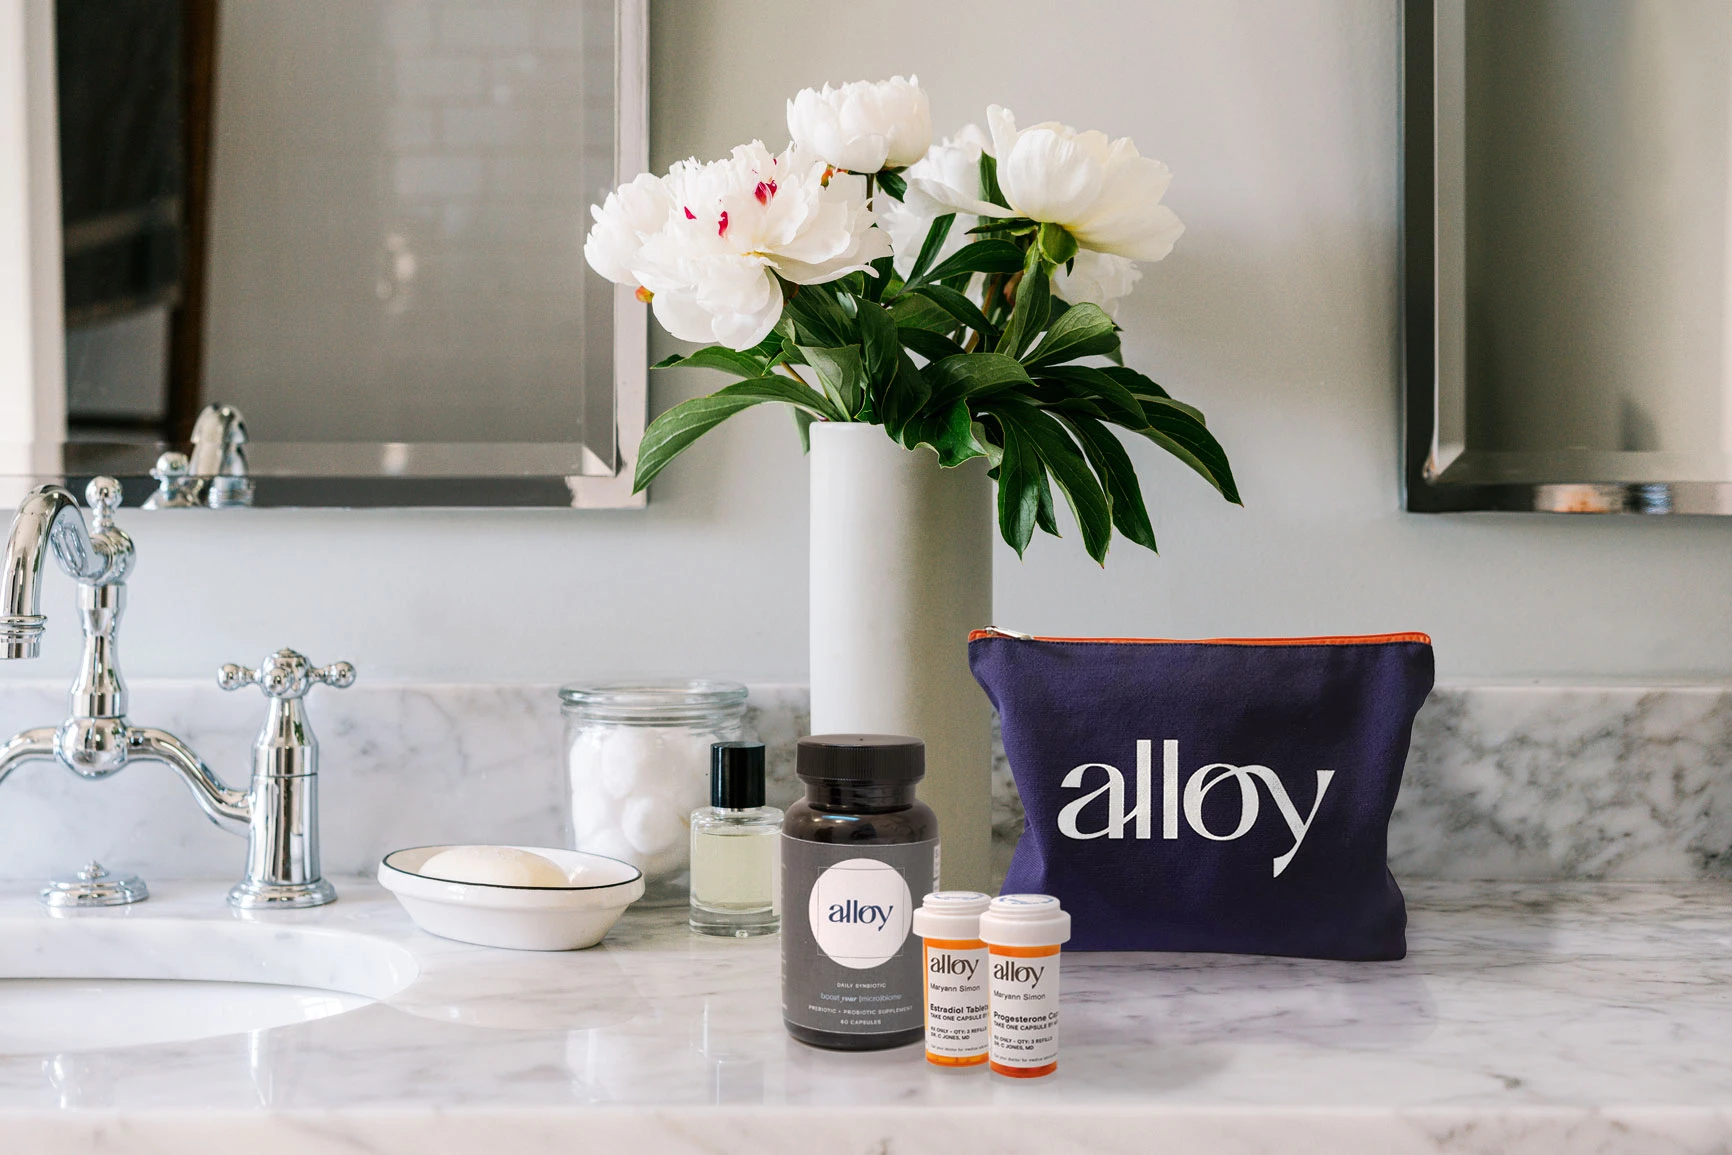 Alloy products on a marble counter next to a vase of white flowers